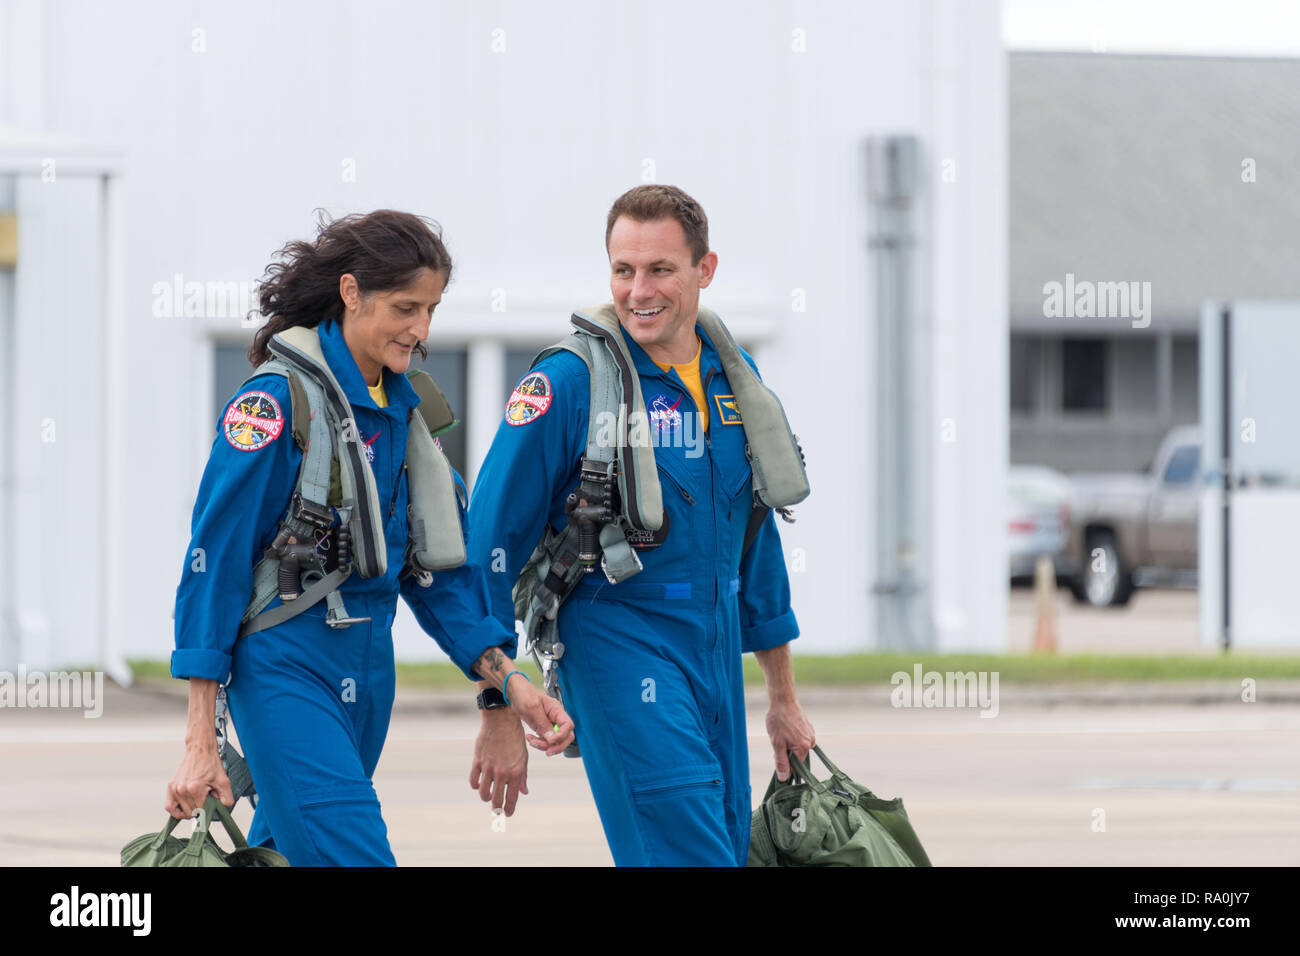 NASA commercial crew astronauts Josh Cassada, right, and Suni Williams walk across the tarmac as they prepare for T-38 training flights at Ellington Field Joint Reserve Base October 9, 2018 in Houston, Texas. Cassada and Williams are assigned to the Boeing Starliner second crewed flight. Stock Photo